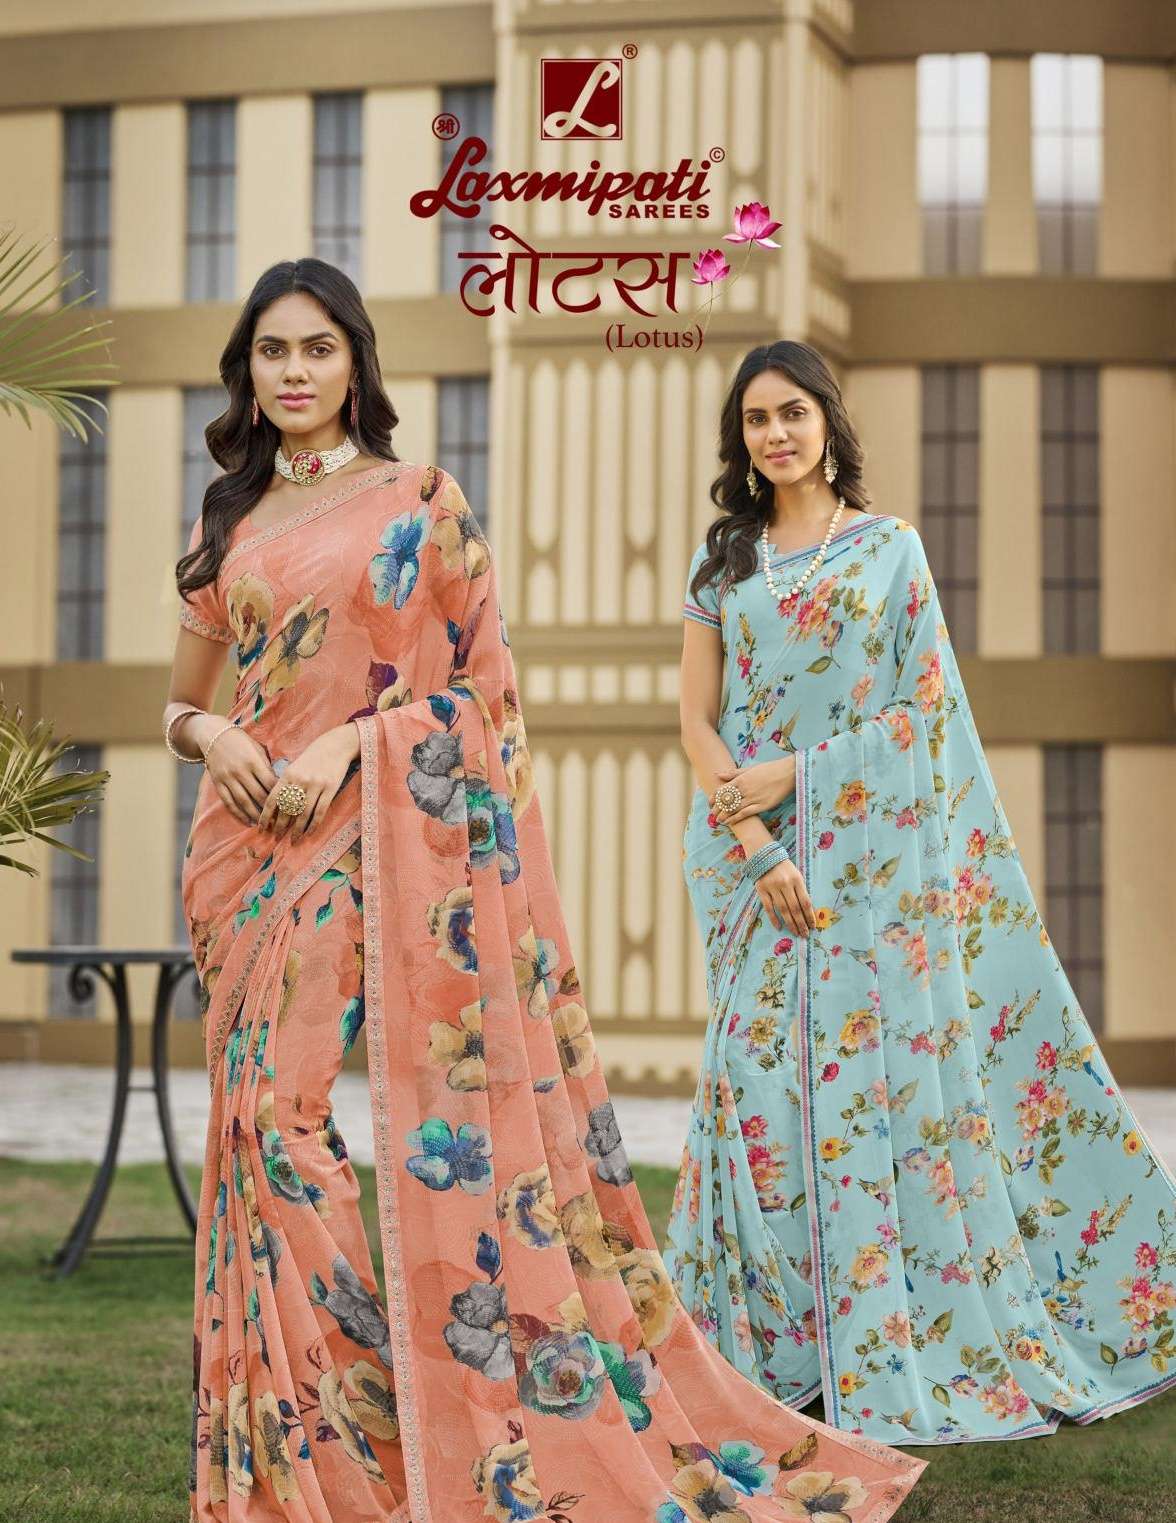 Laxmipati Lotus Georgette with Flower printed saree collecti...